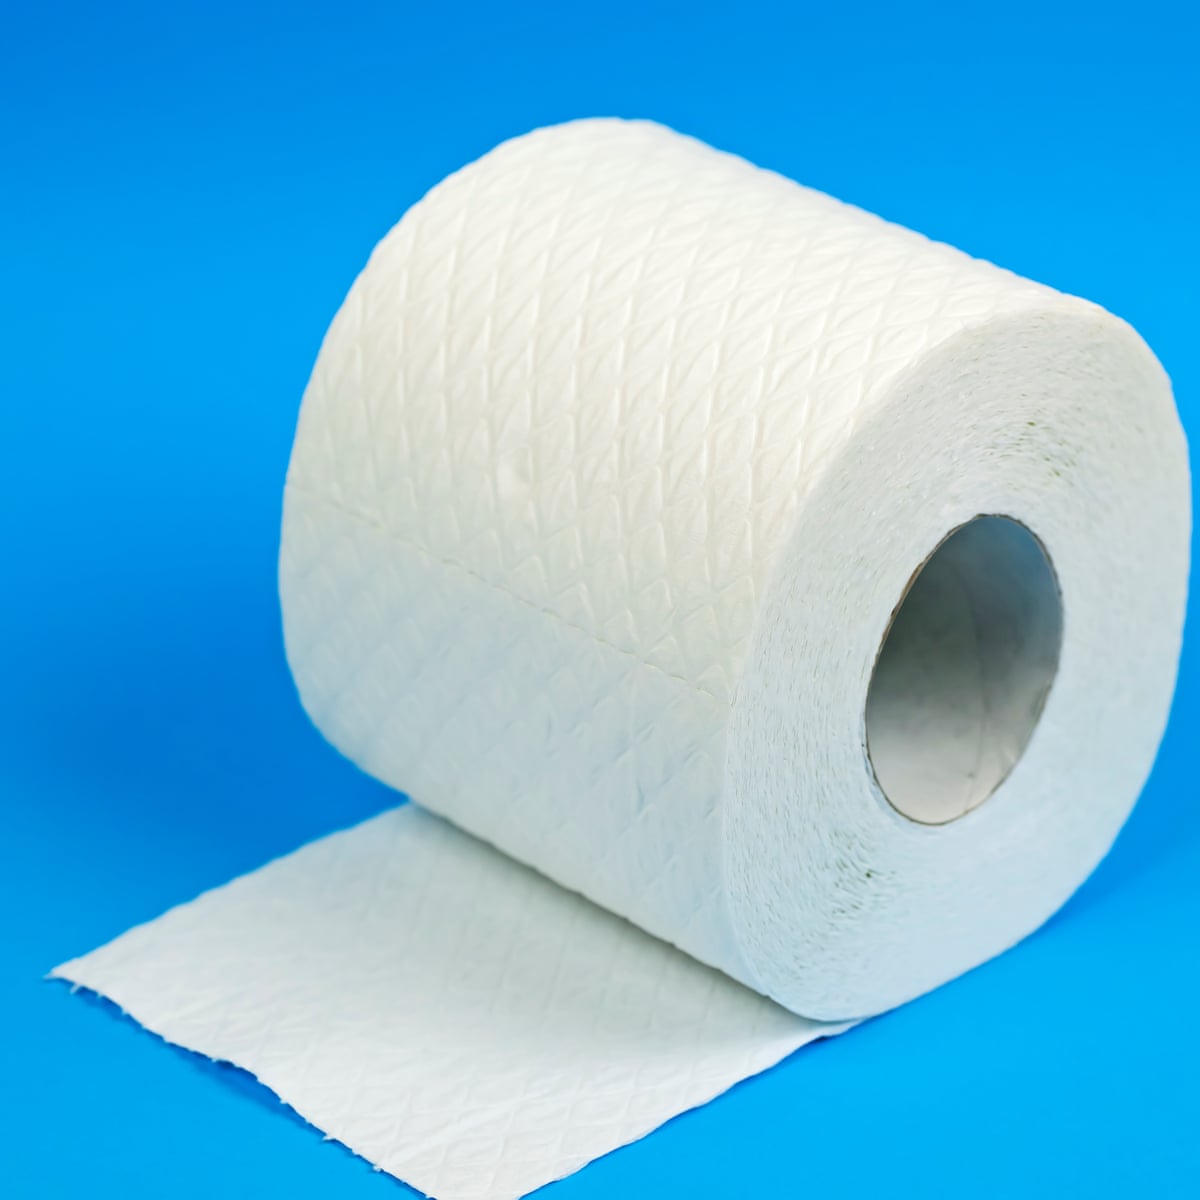 Are Toilet Paper Rolls Recyclable? Uses in Paper Products